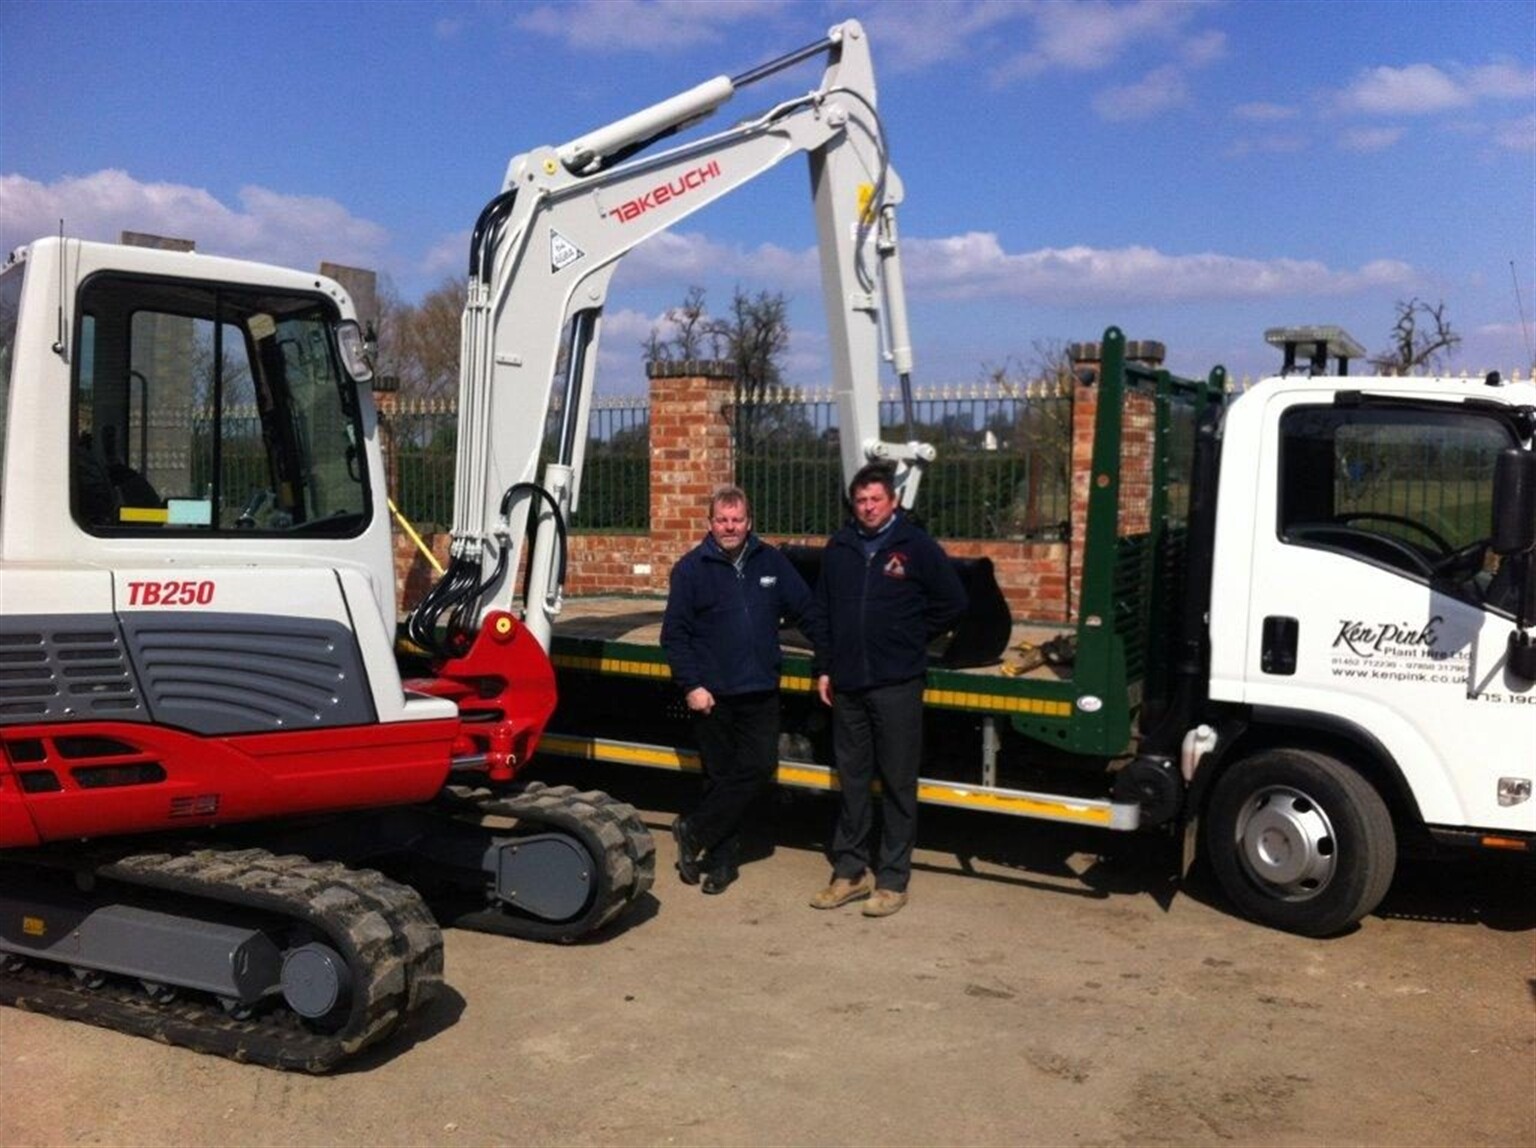 Ken Pink Plant Hire opts for red & grey Takeuchis